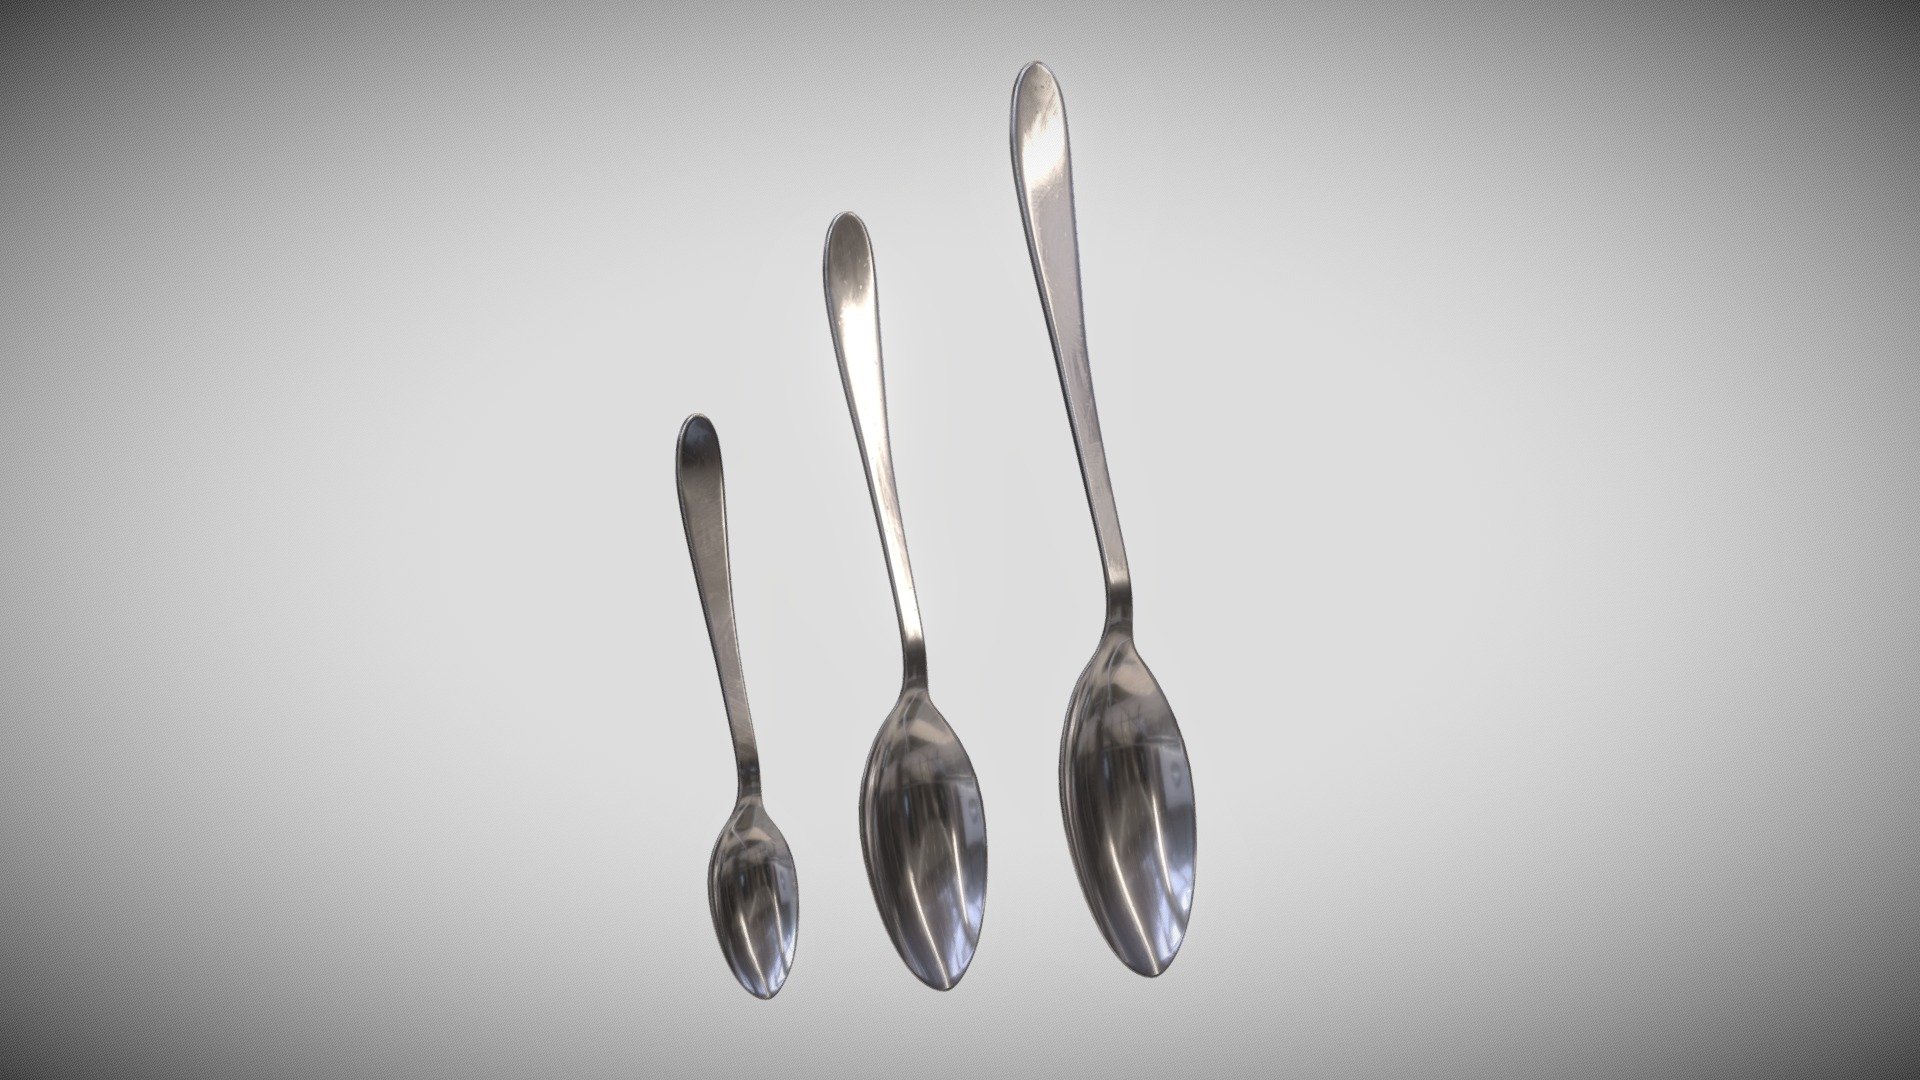 Check cutlery collection (16,7% off): https://skfb.ly/oz8D8

[Zip File]

Mesh Information:




Subdivision-ready models

Subdivision 0: 548 faces, 1096 tris

Subdivision 1: 2192 faces, 4384 tris

Subdivision 2: 8768 faces, 17536 tris

UV unwrapped

Object Information:




3 models: Teaspoon, Dessert spoon, Soup spoon

Teaspoon World scale (cm): 0.8 height x 12.2 x 2.2

Dessert spoon World scale (cm): 1 height x 16.7 x 3.4

Dinner spoon World scale (cm): 1.2 height x 20.3 x 4

Texture Information:




Texture size: 1024x1024, 2048x2048

BaseColor

Roughness

Metallic

Normal OpenGL and DirectX

PNG format

Formats include: 




.obj

.fbx

.blend

~ If you have questions or problems, please feel free to contact me 3d model